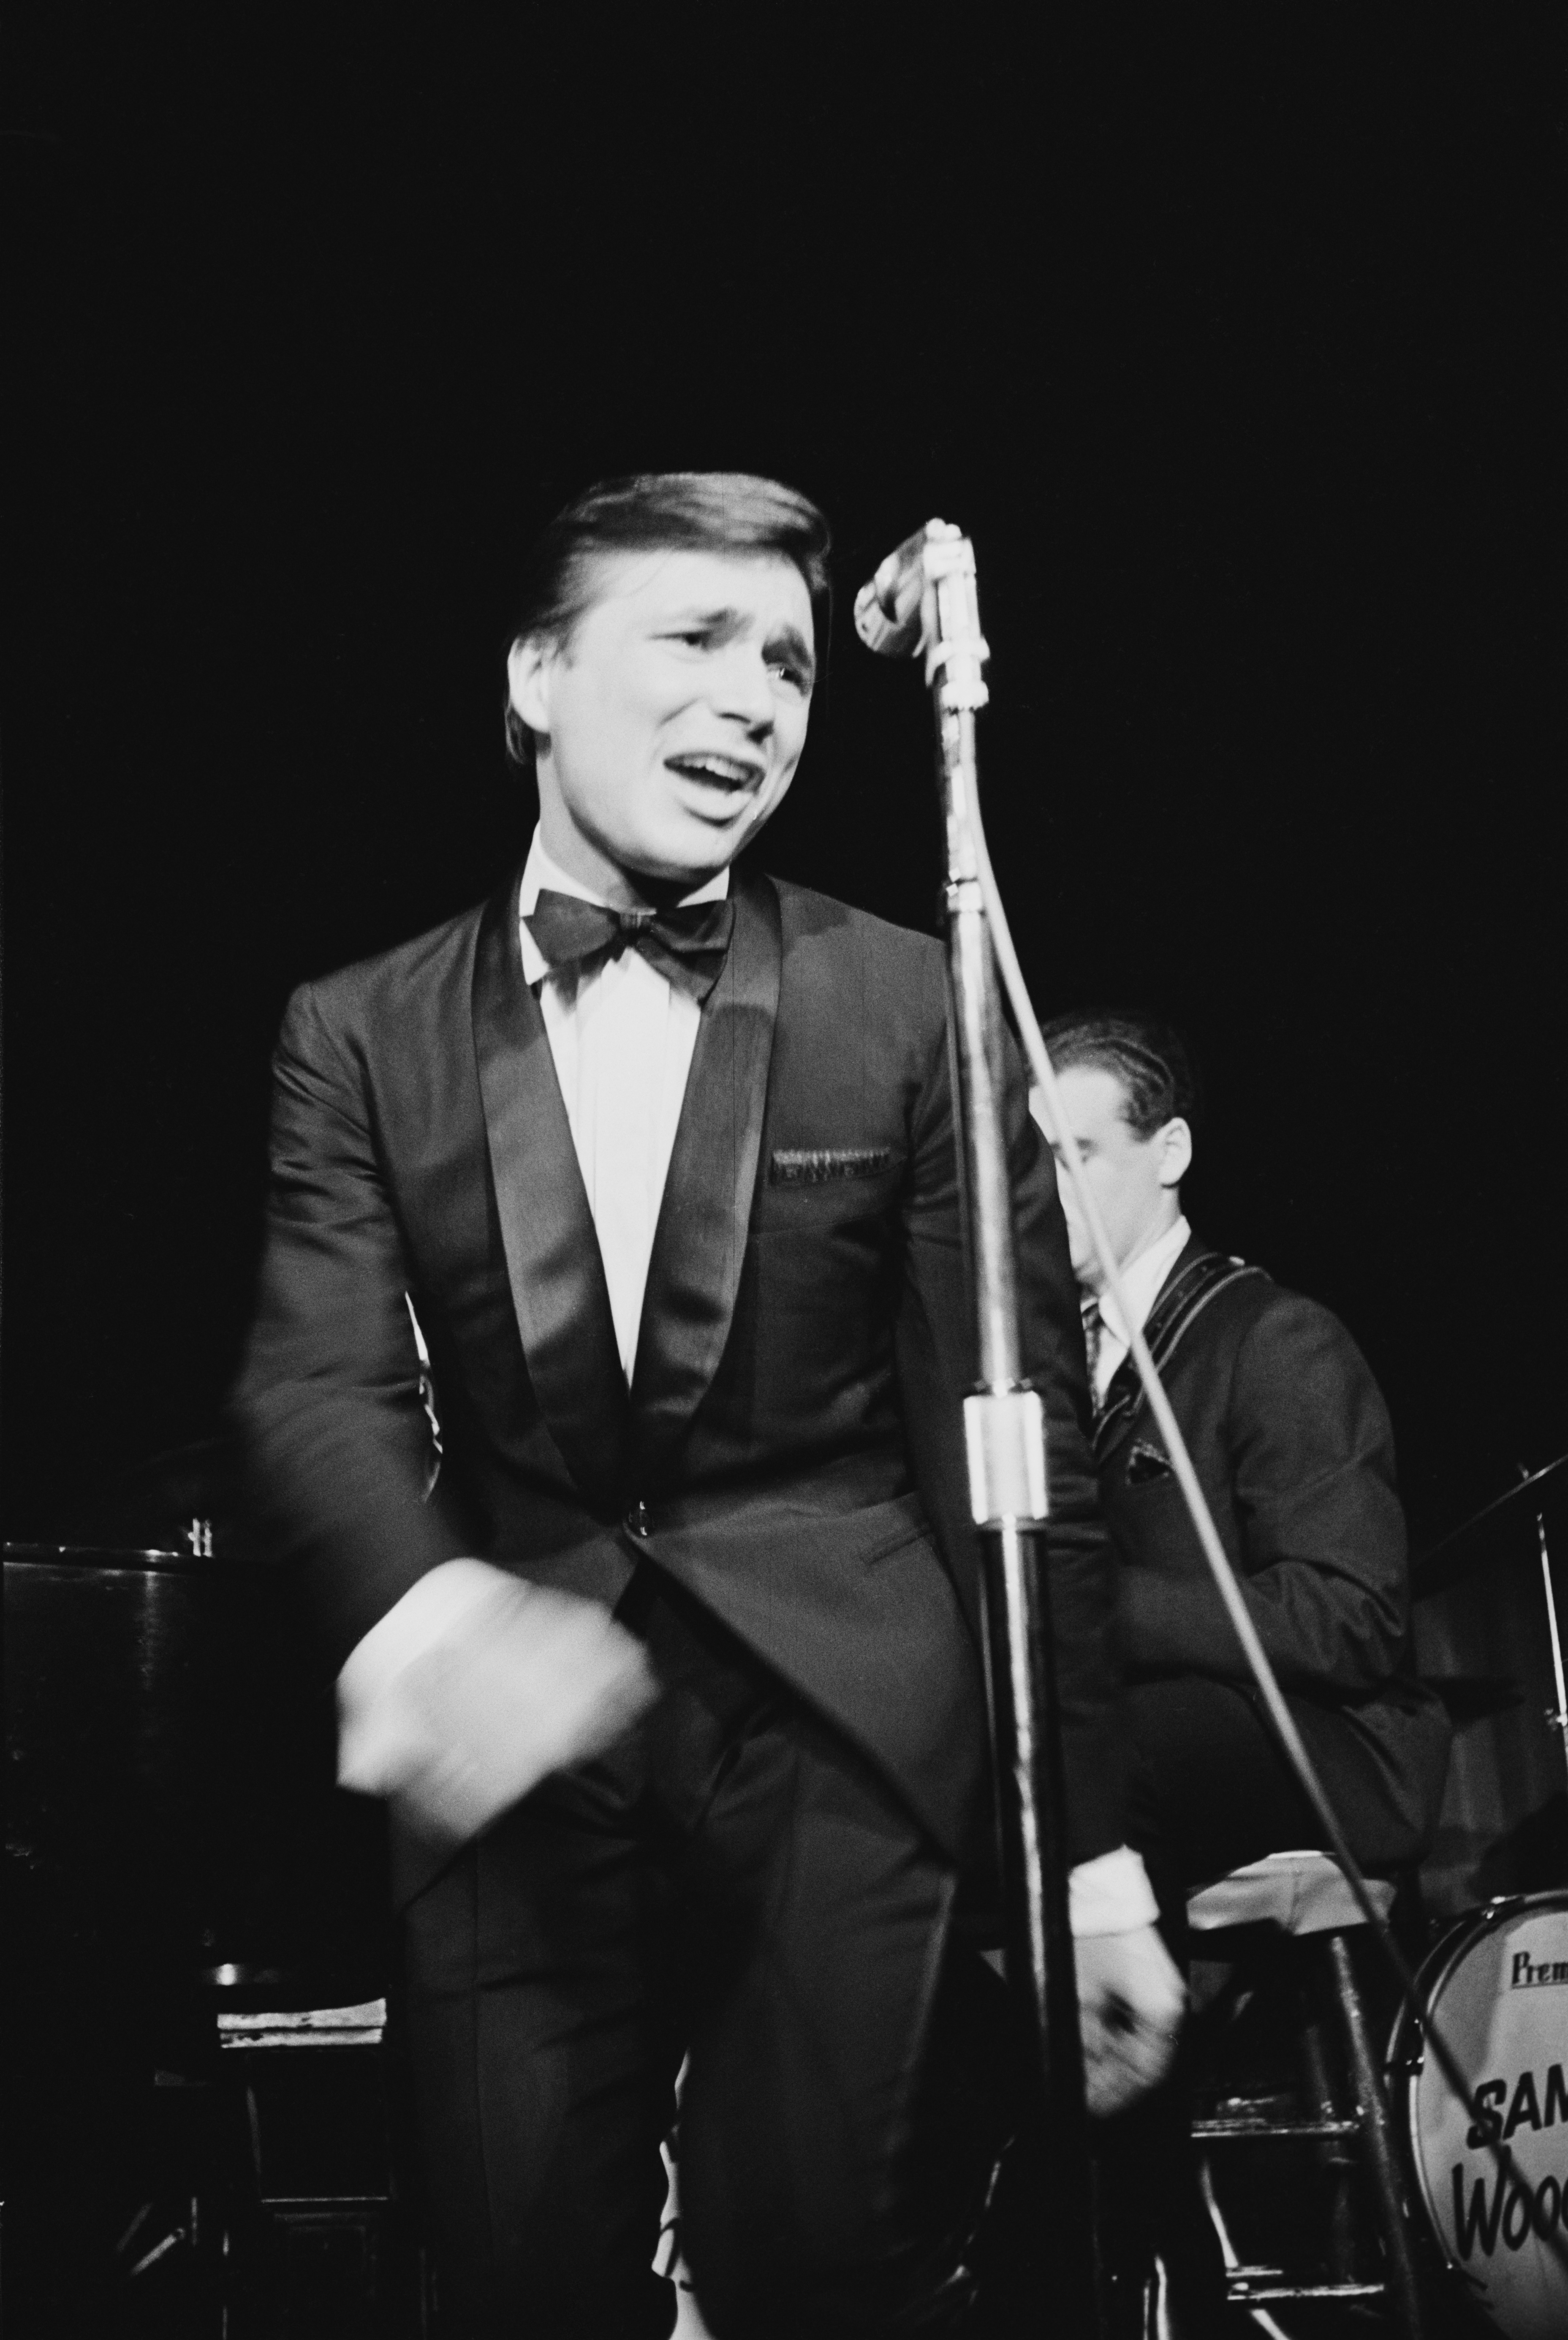 Vignon in concert at the Basin Street East nightclub in New York City, circa 1963